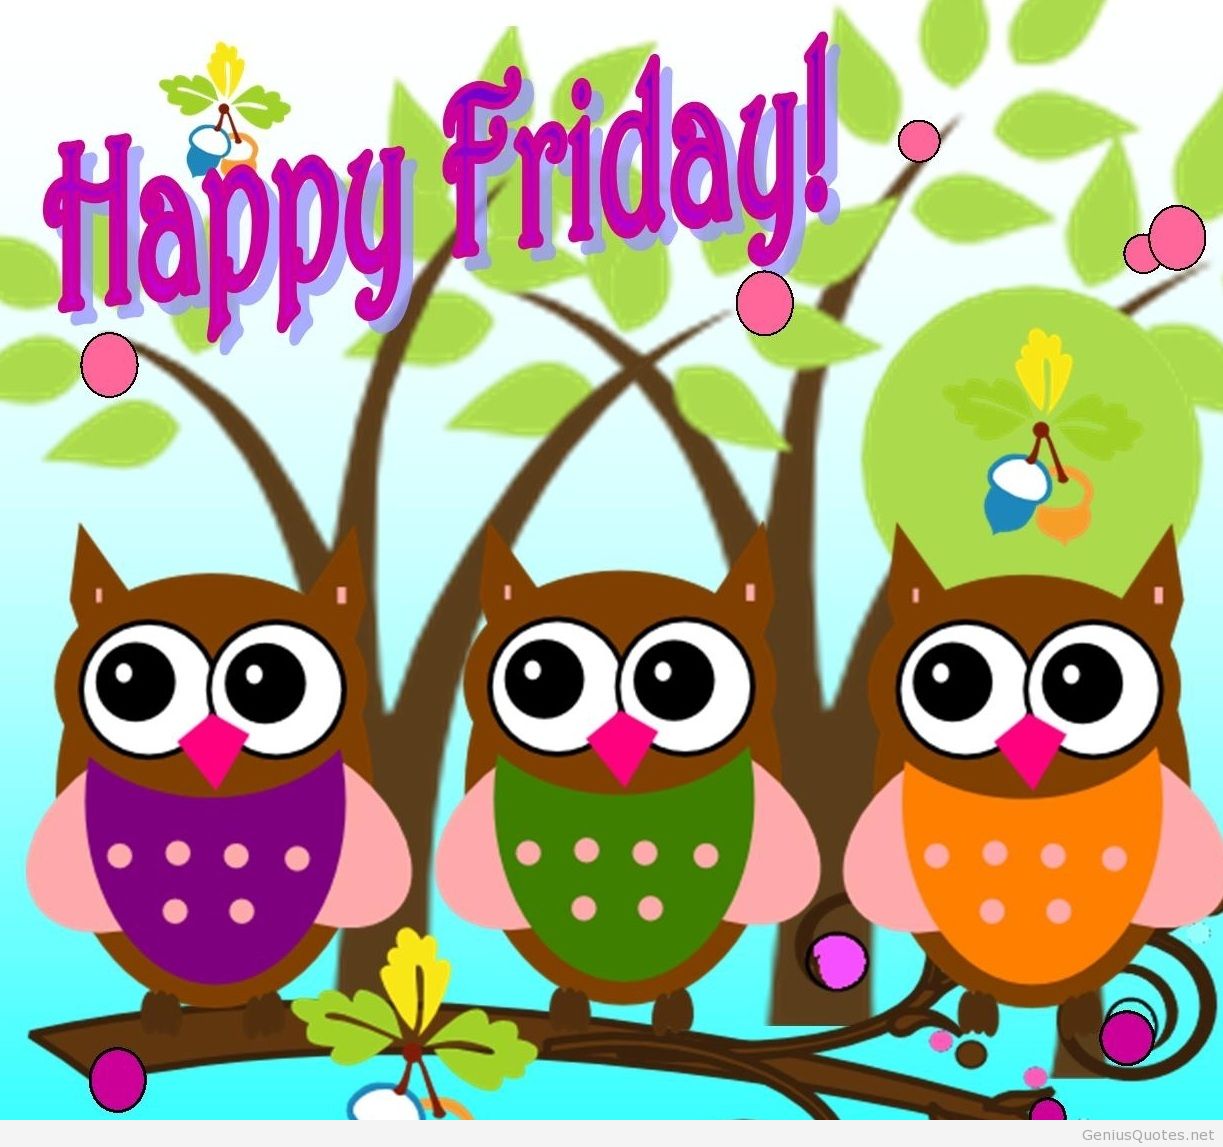 Free Friday Clipart, Download Free Clip Art, Free Clip Art.